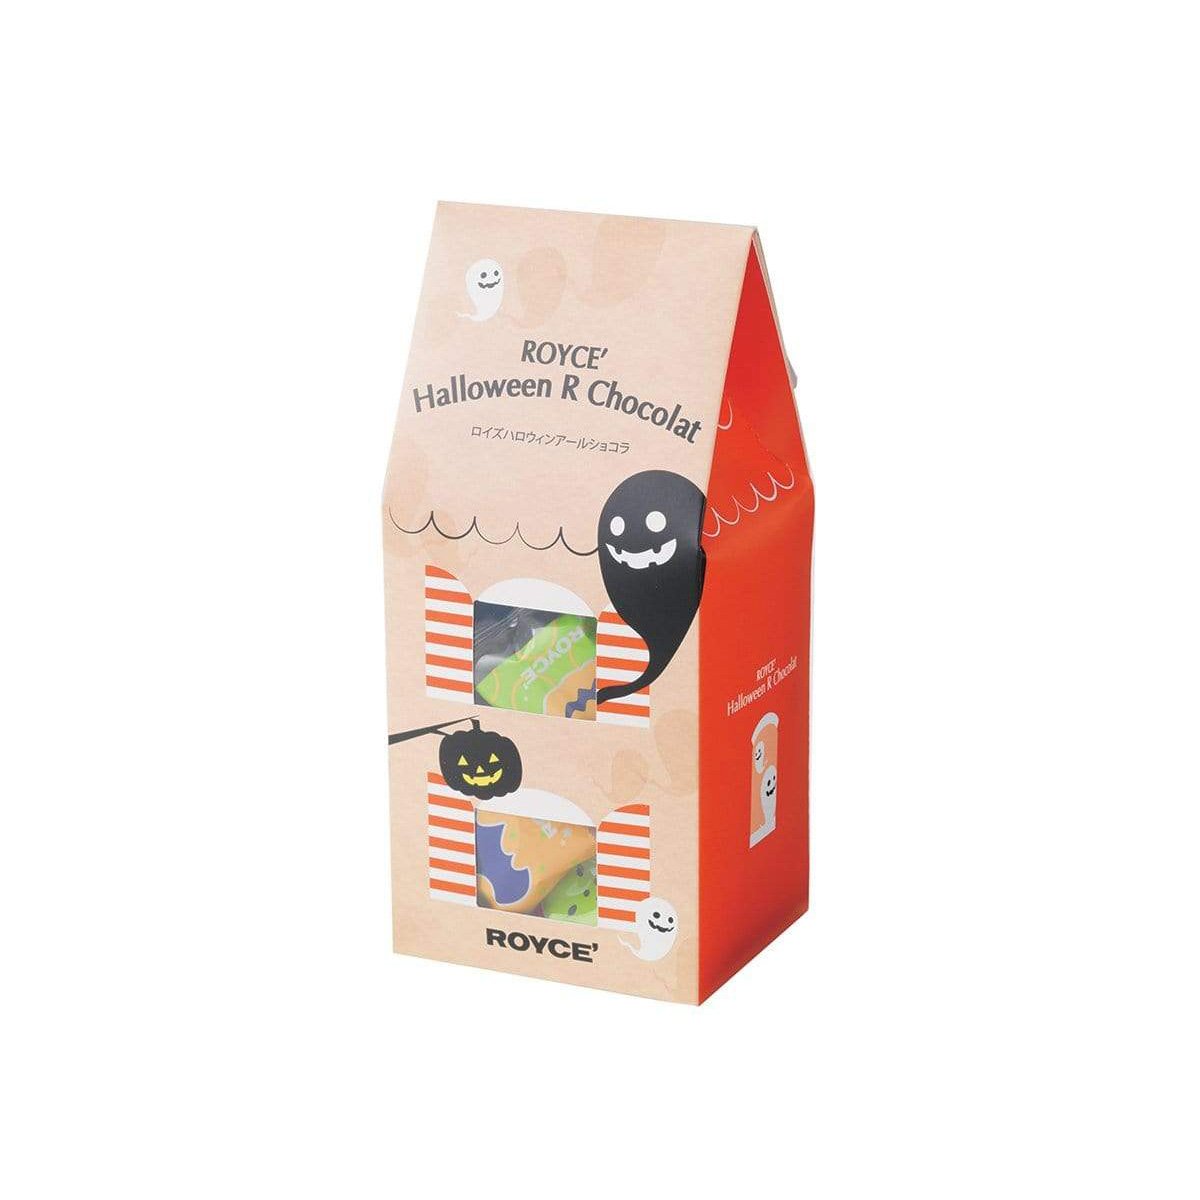 Image shows a box in orange and light brown colors with illustrations of ghosts and pumpkins. Text says ROYCE' Halloween R Chocolat ROYCE'. Background is in white.